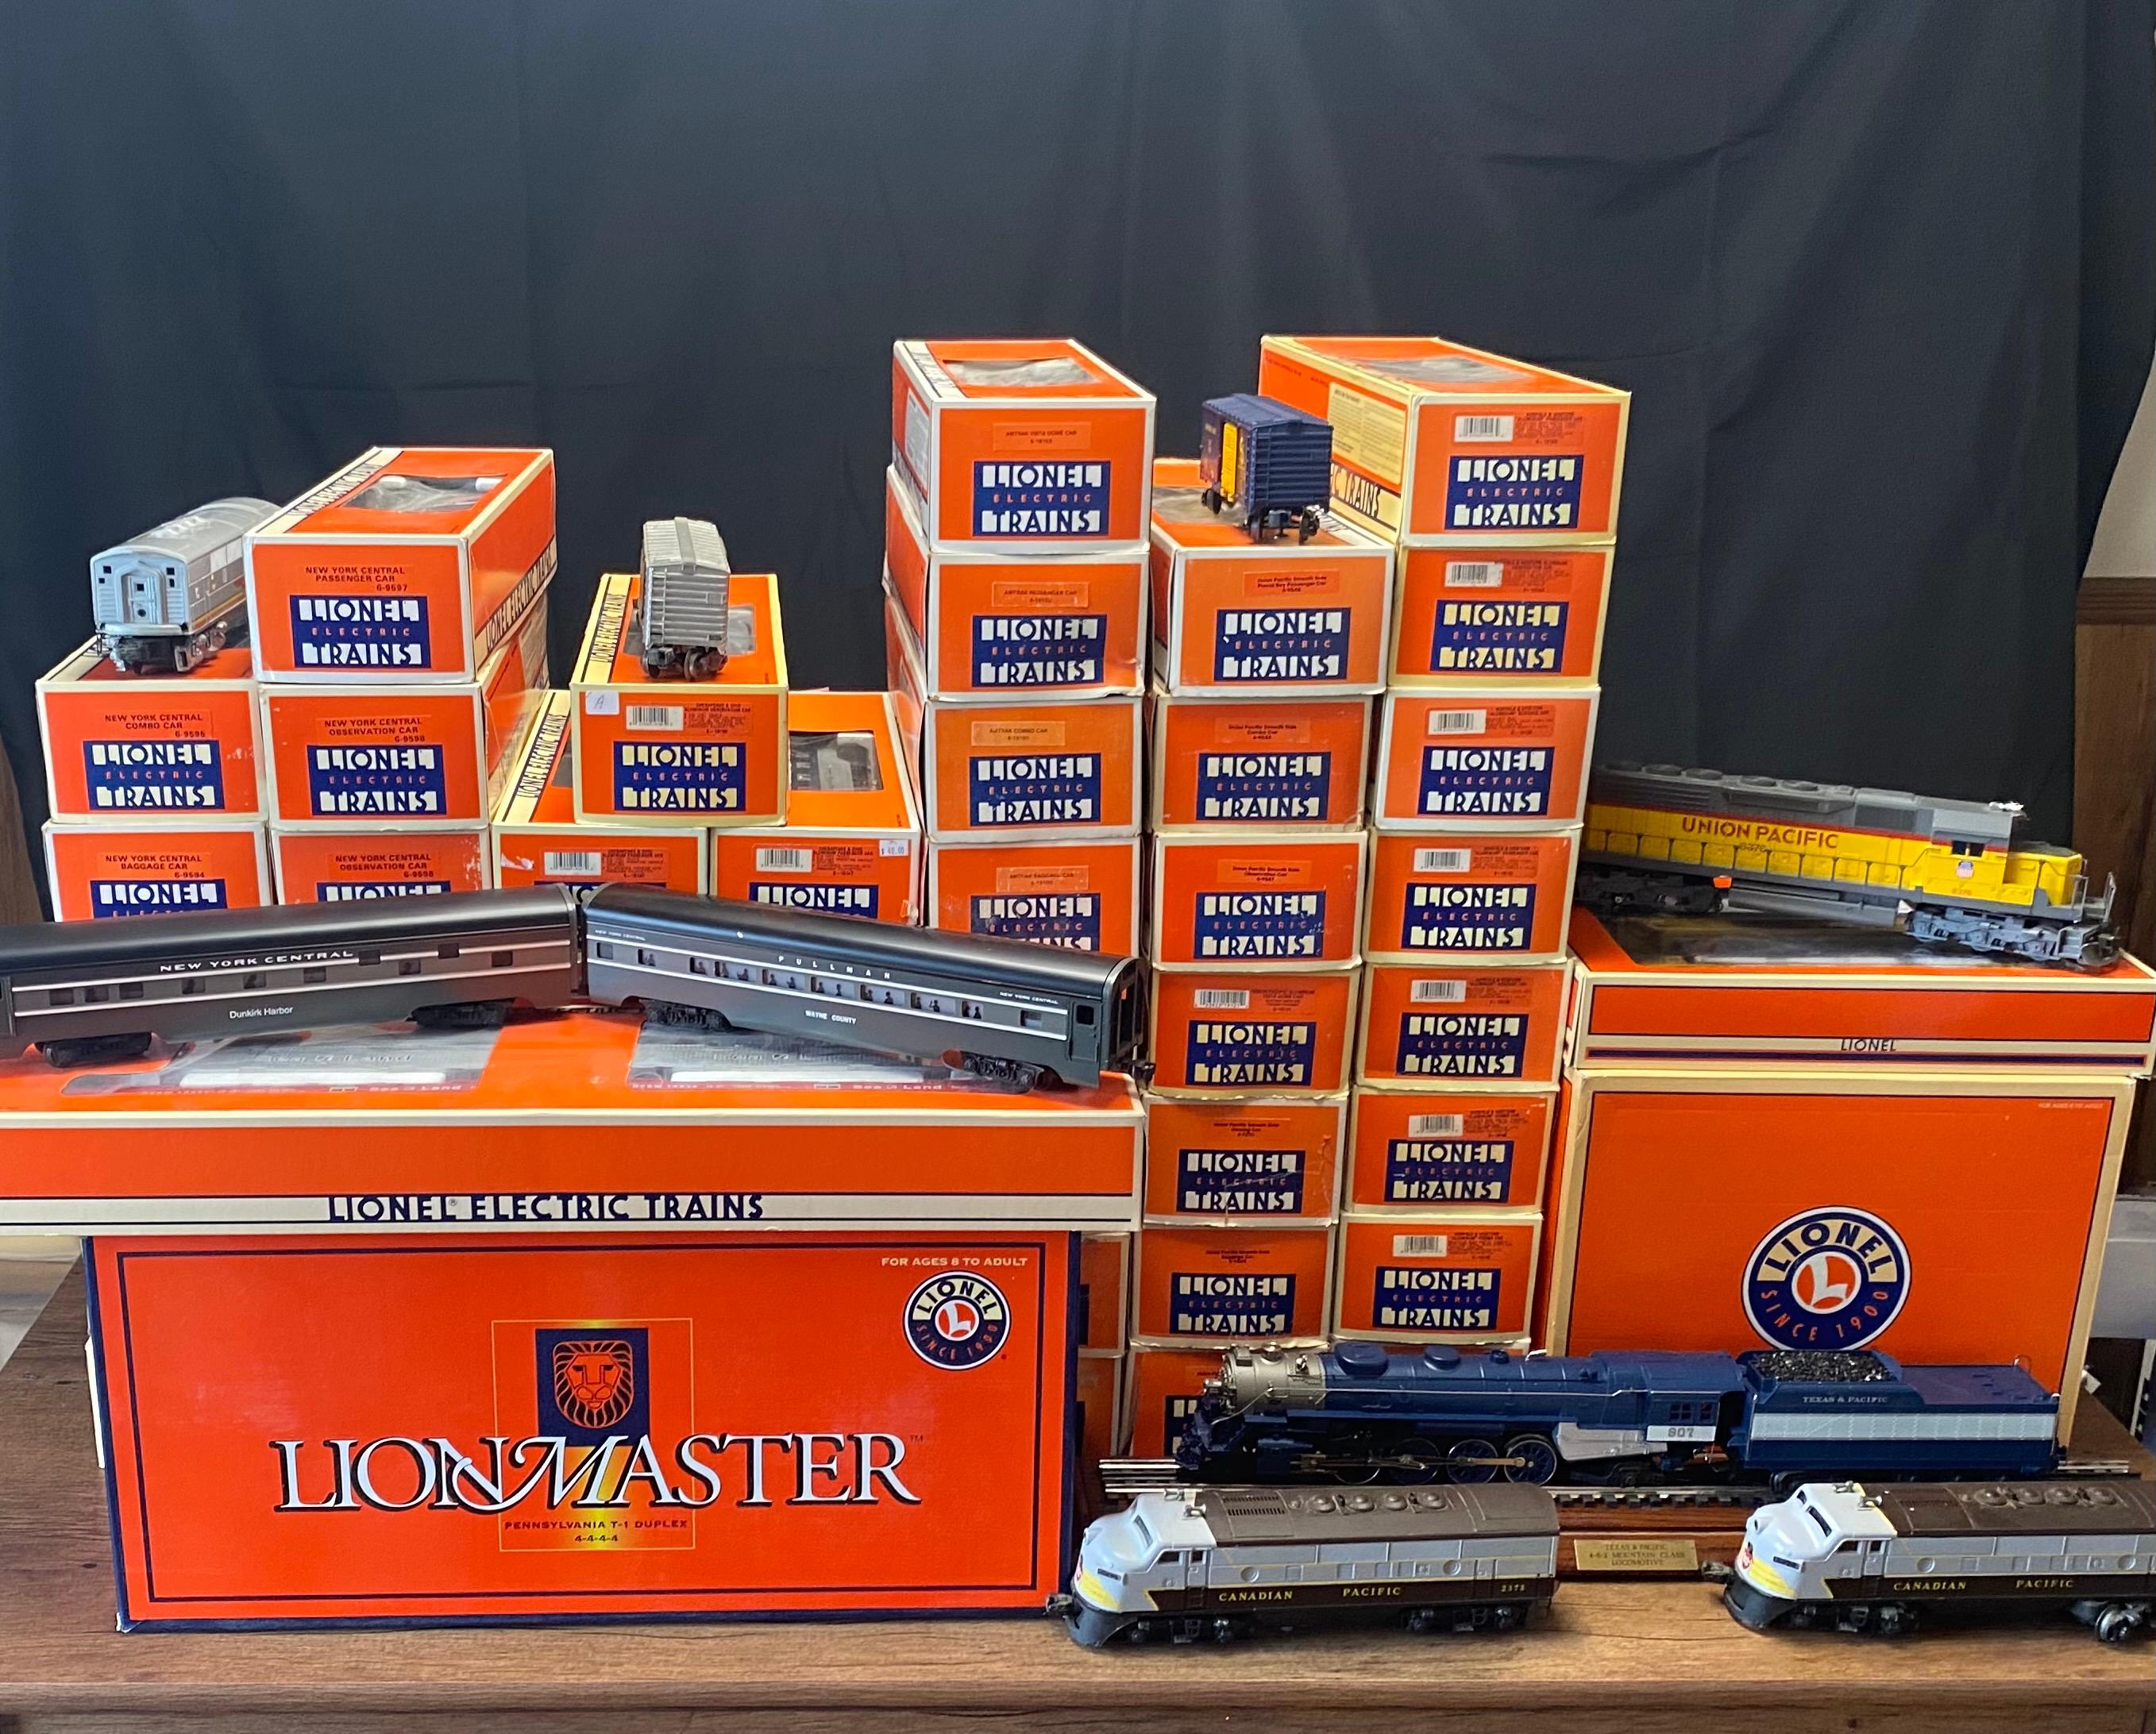 LARGE COLLECTION OF LIONEL TRAINS, US GOLD & SILVER COINS, THOMAS KINKADE ARTWORK, DIECAST MODELS & MORE!